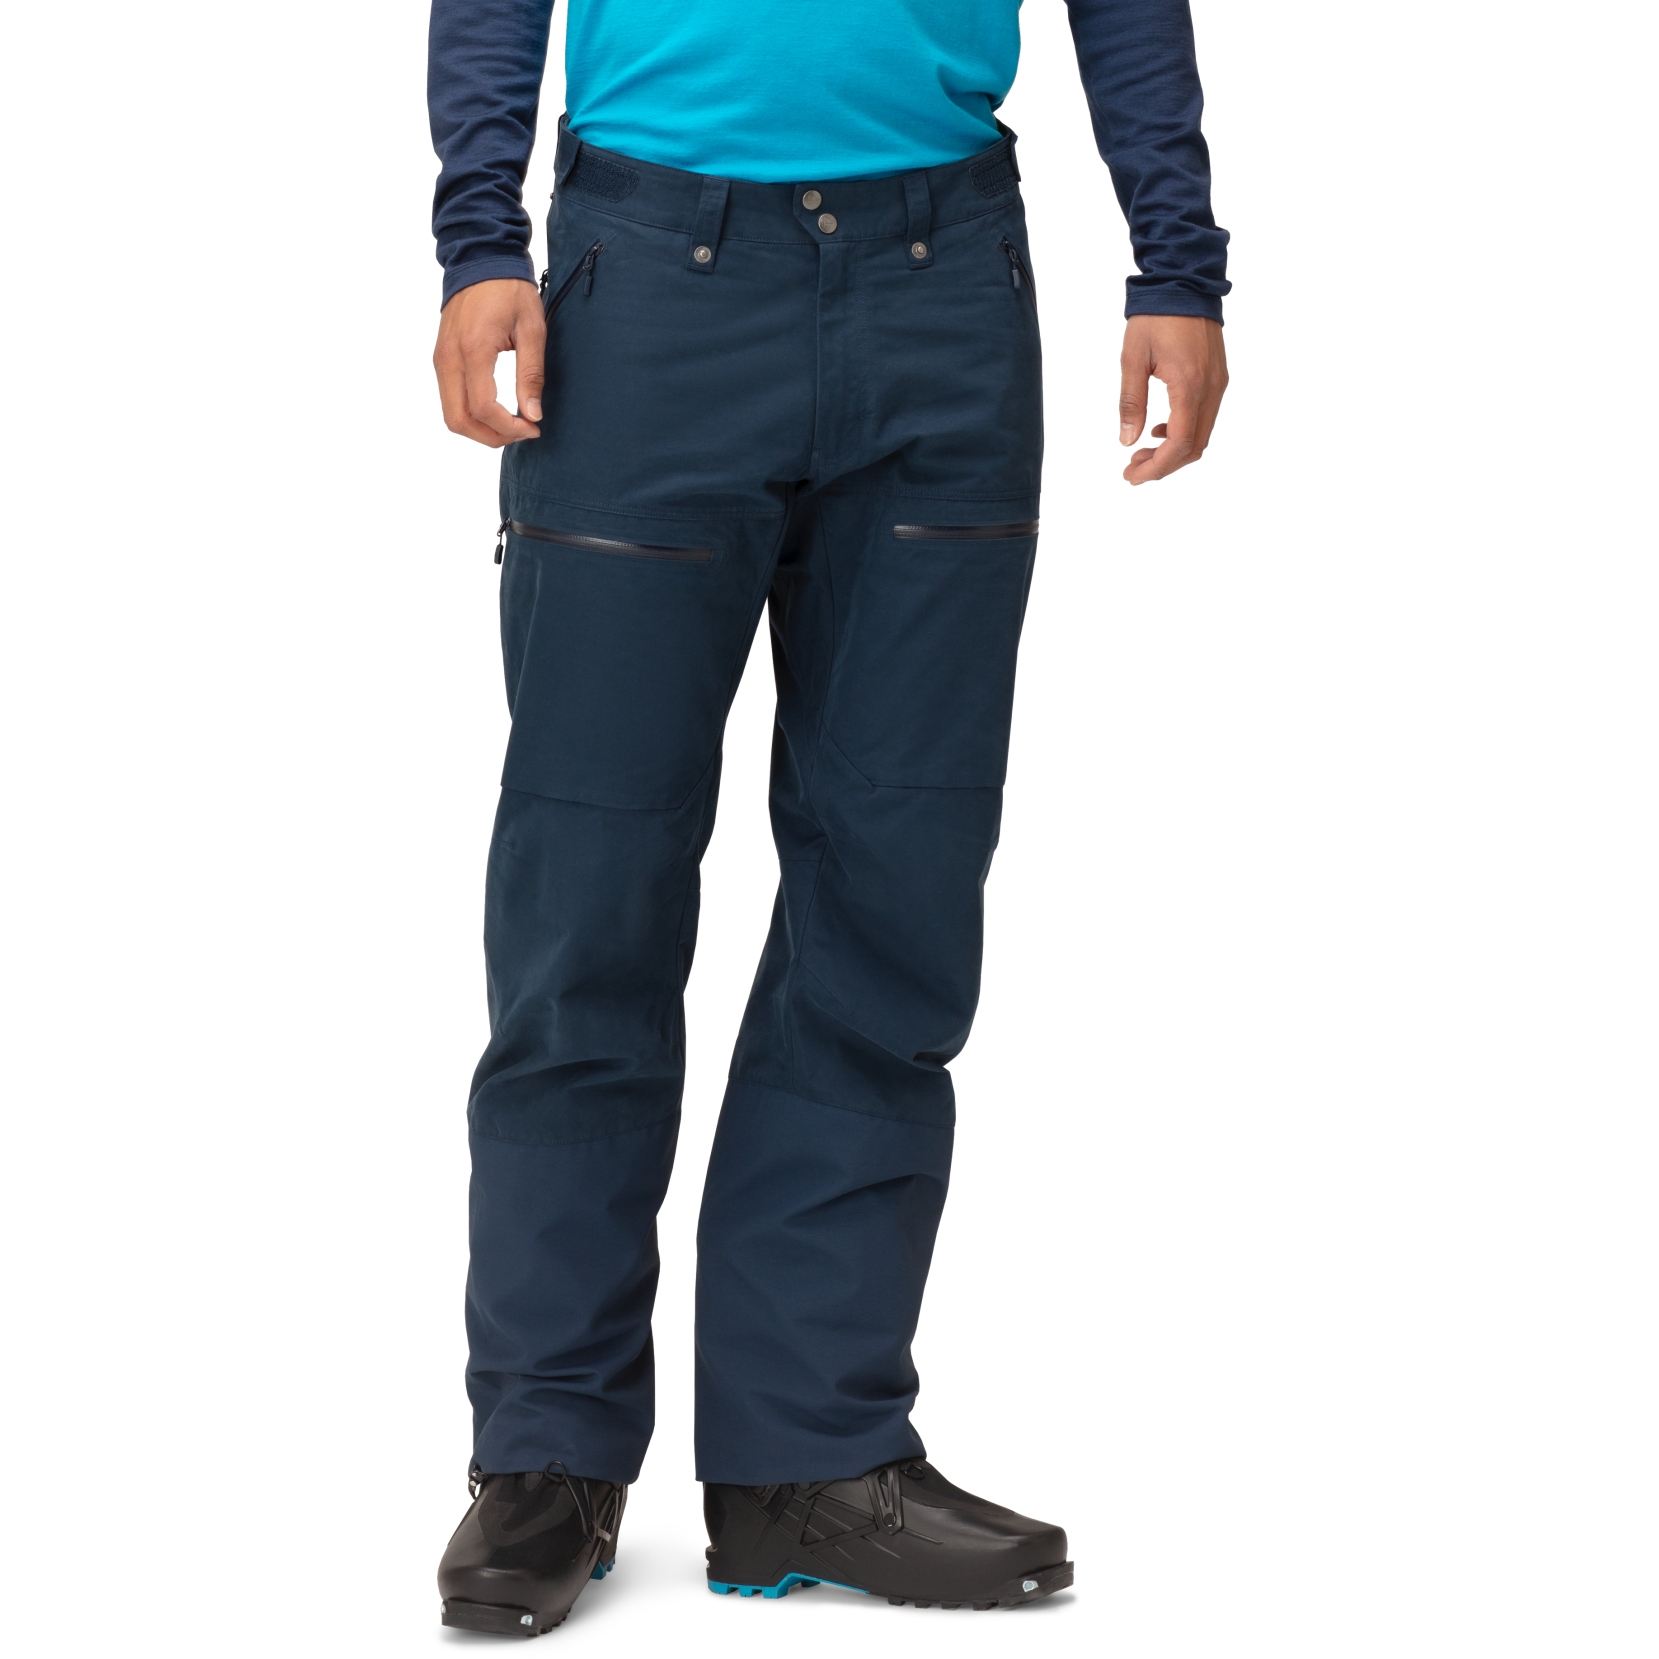 Buy American Indigo Two Stretchable Mens Trousers Online at Best Price in  India on Naaptol.com